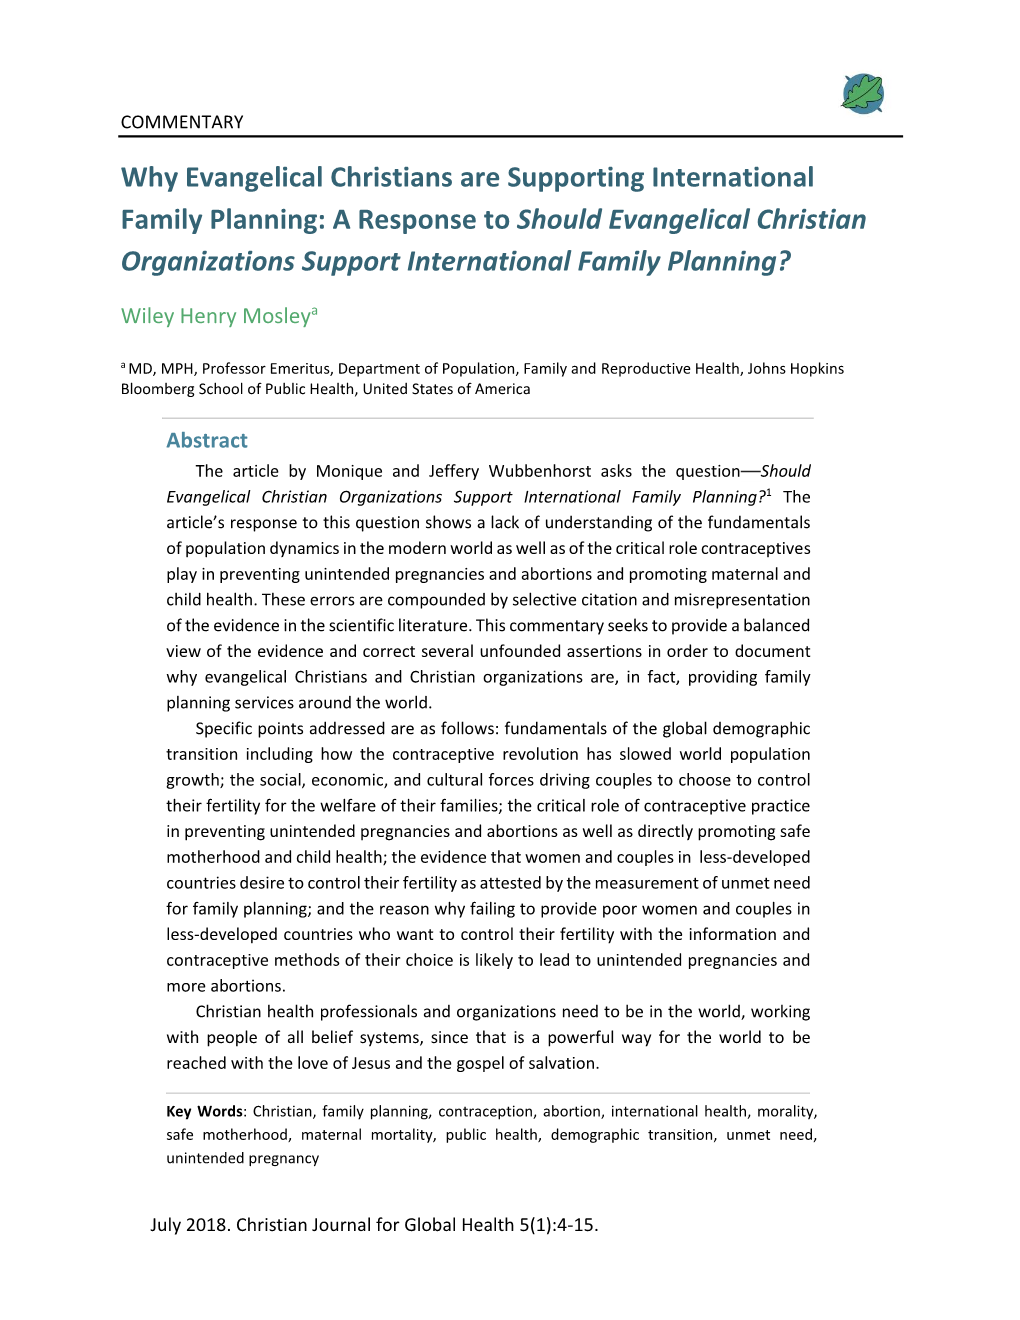 Why Evangelical Christians Are Supporting International Family